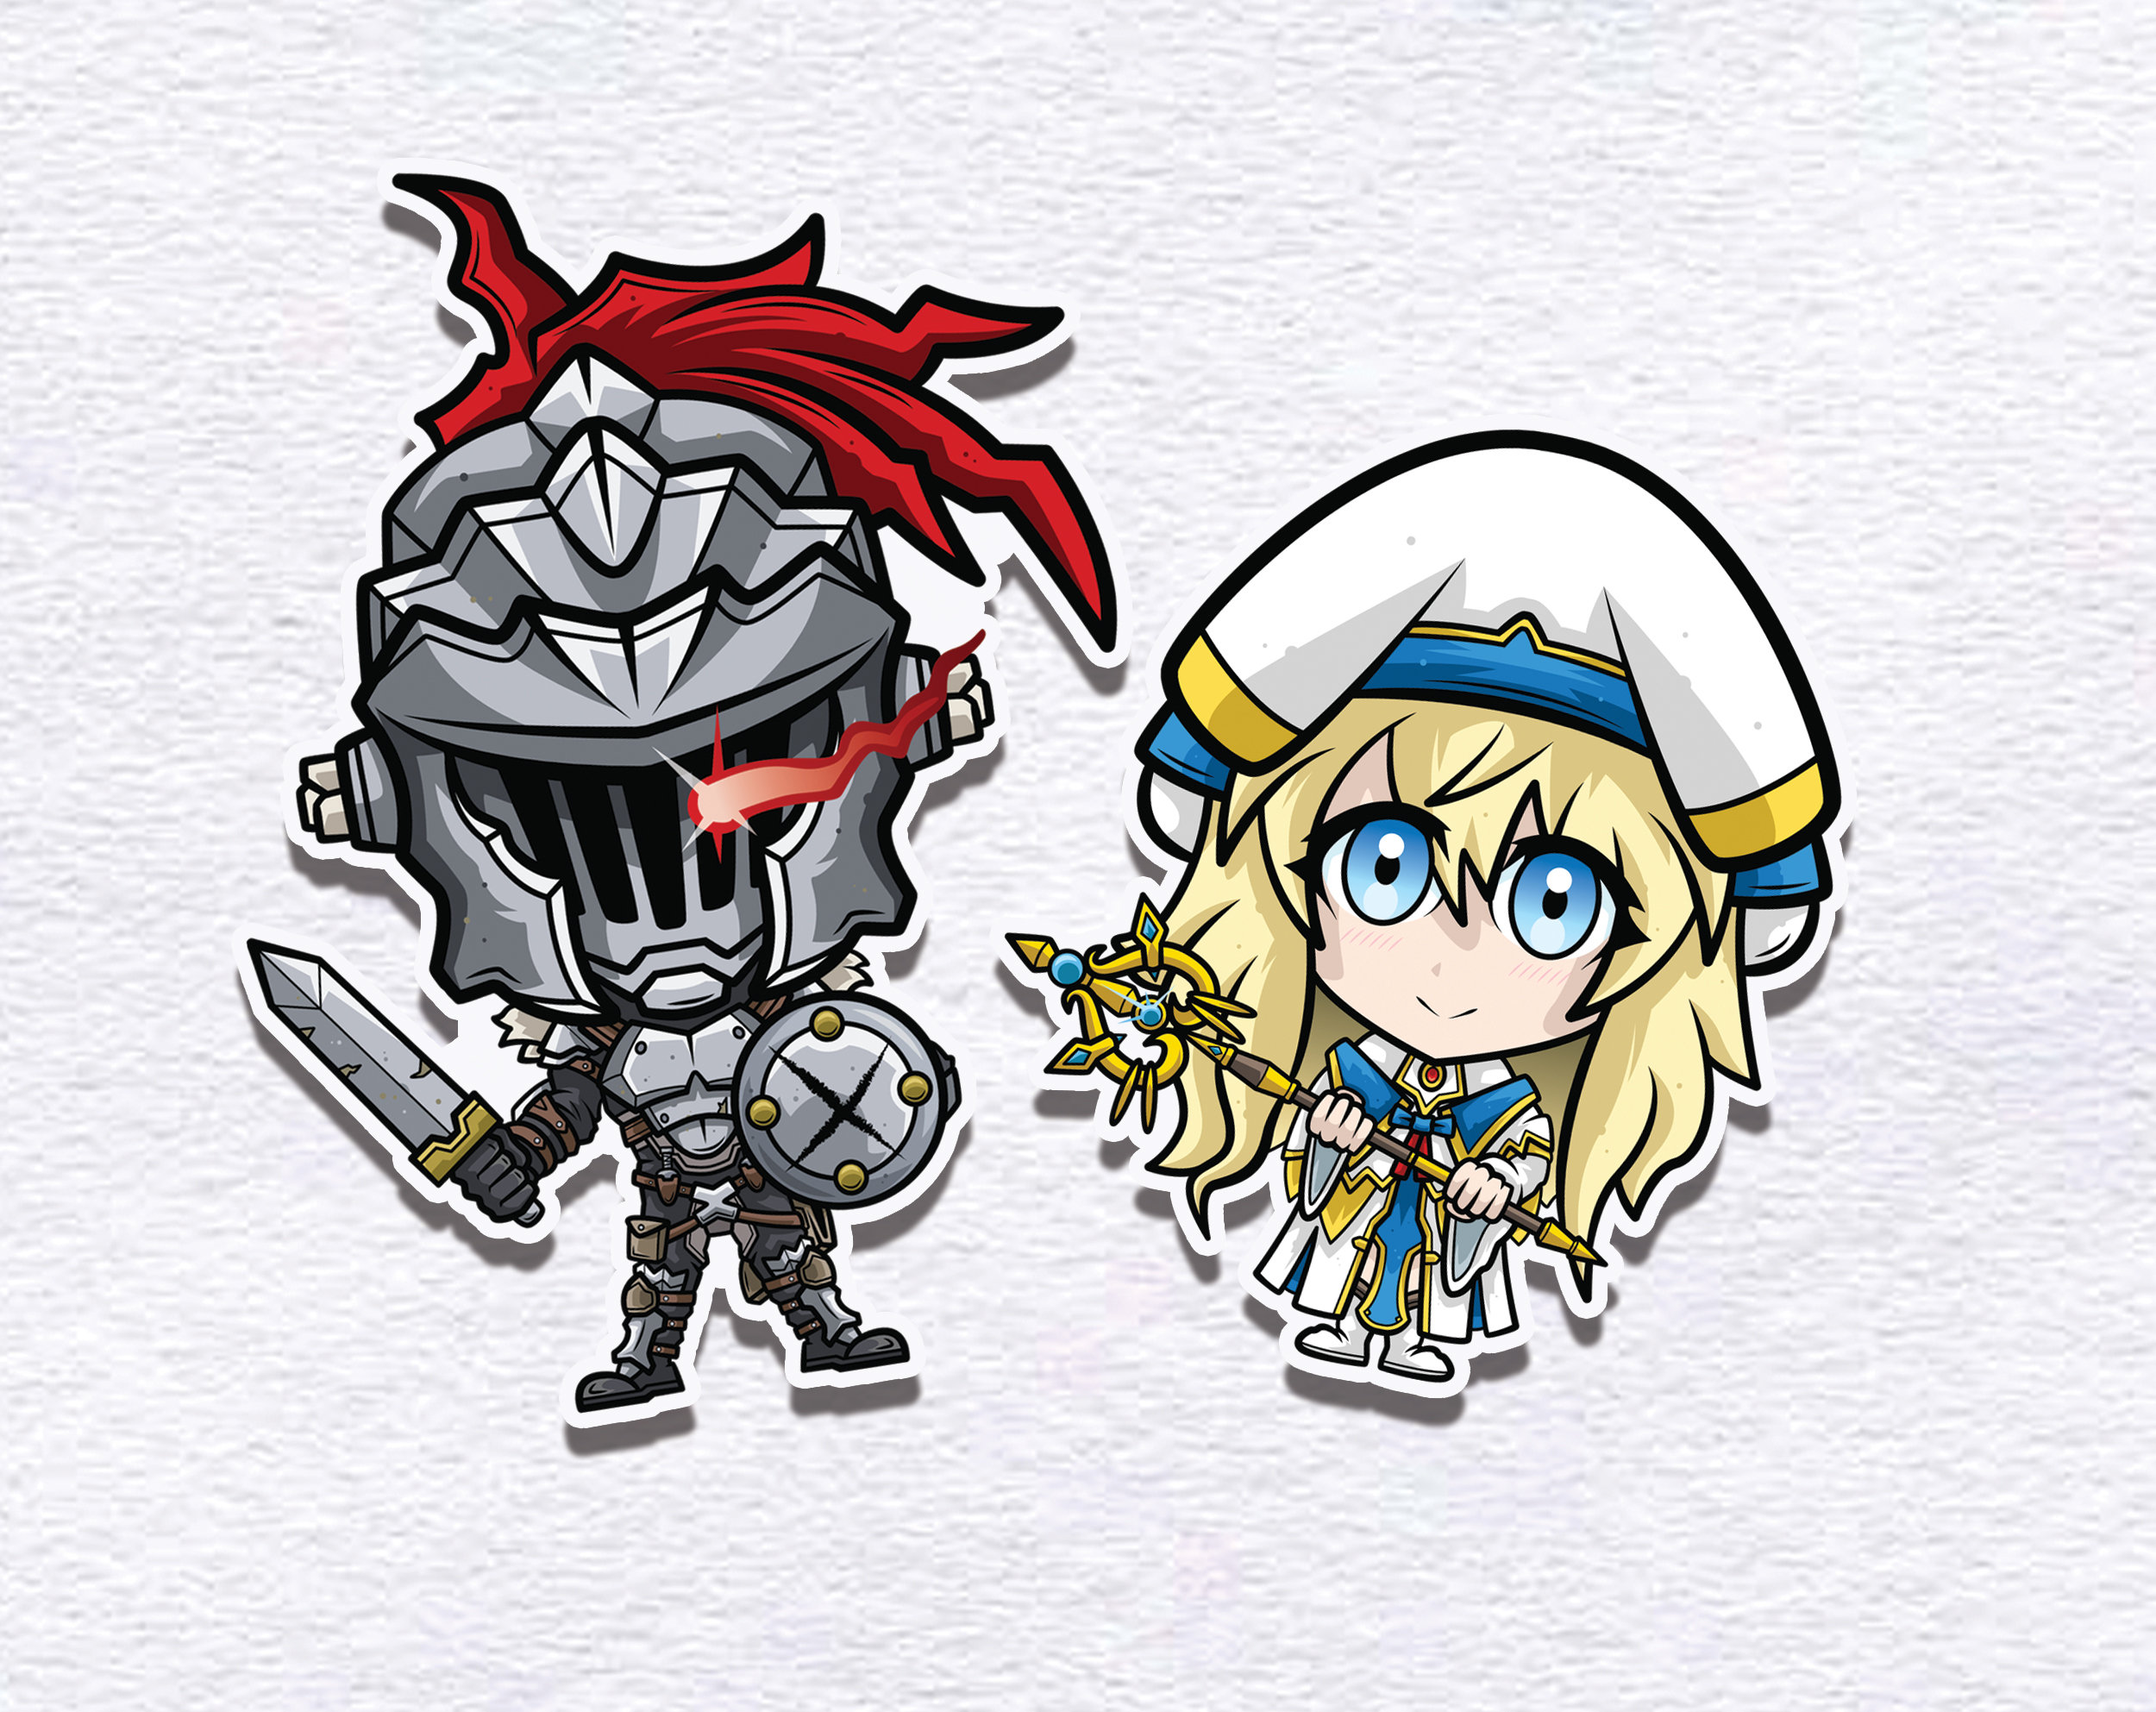 Goblin Slayer: Understanding its R Rating and Inappropriate for